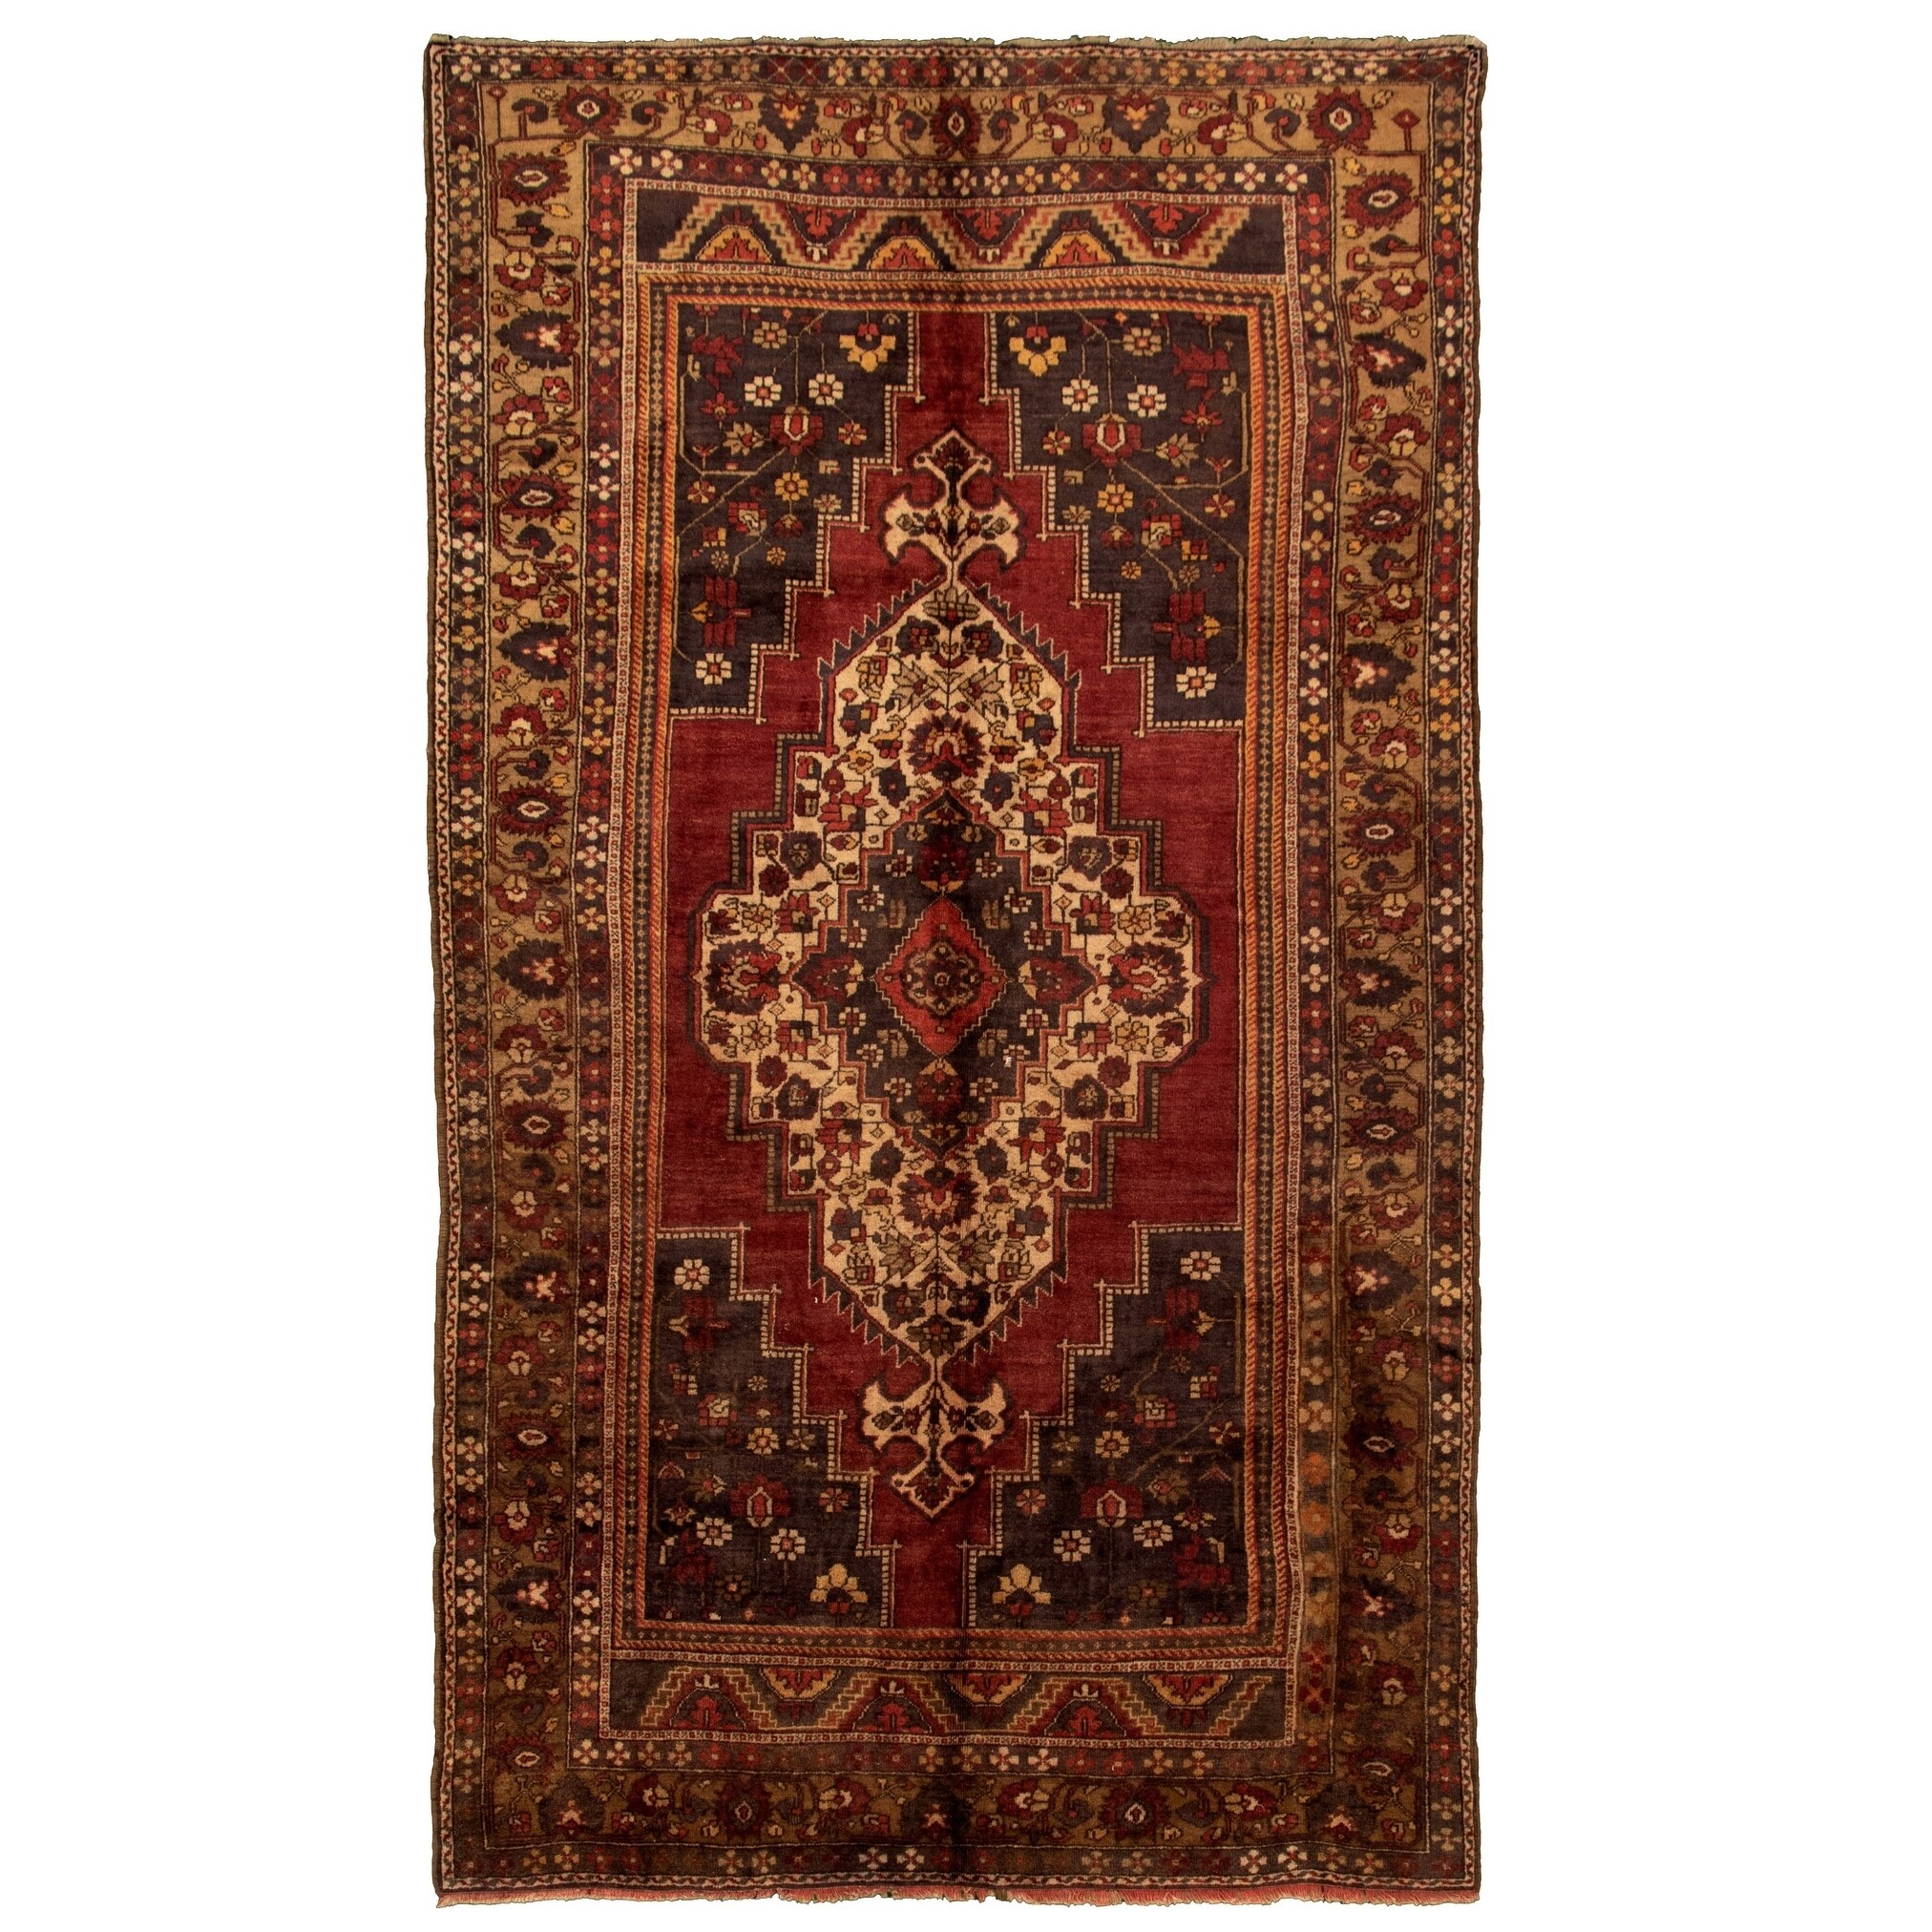 Hand-knotted Anadol Vintage Red Wool Rug - 6'5 x 11'7 - Bed Bath